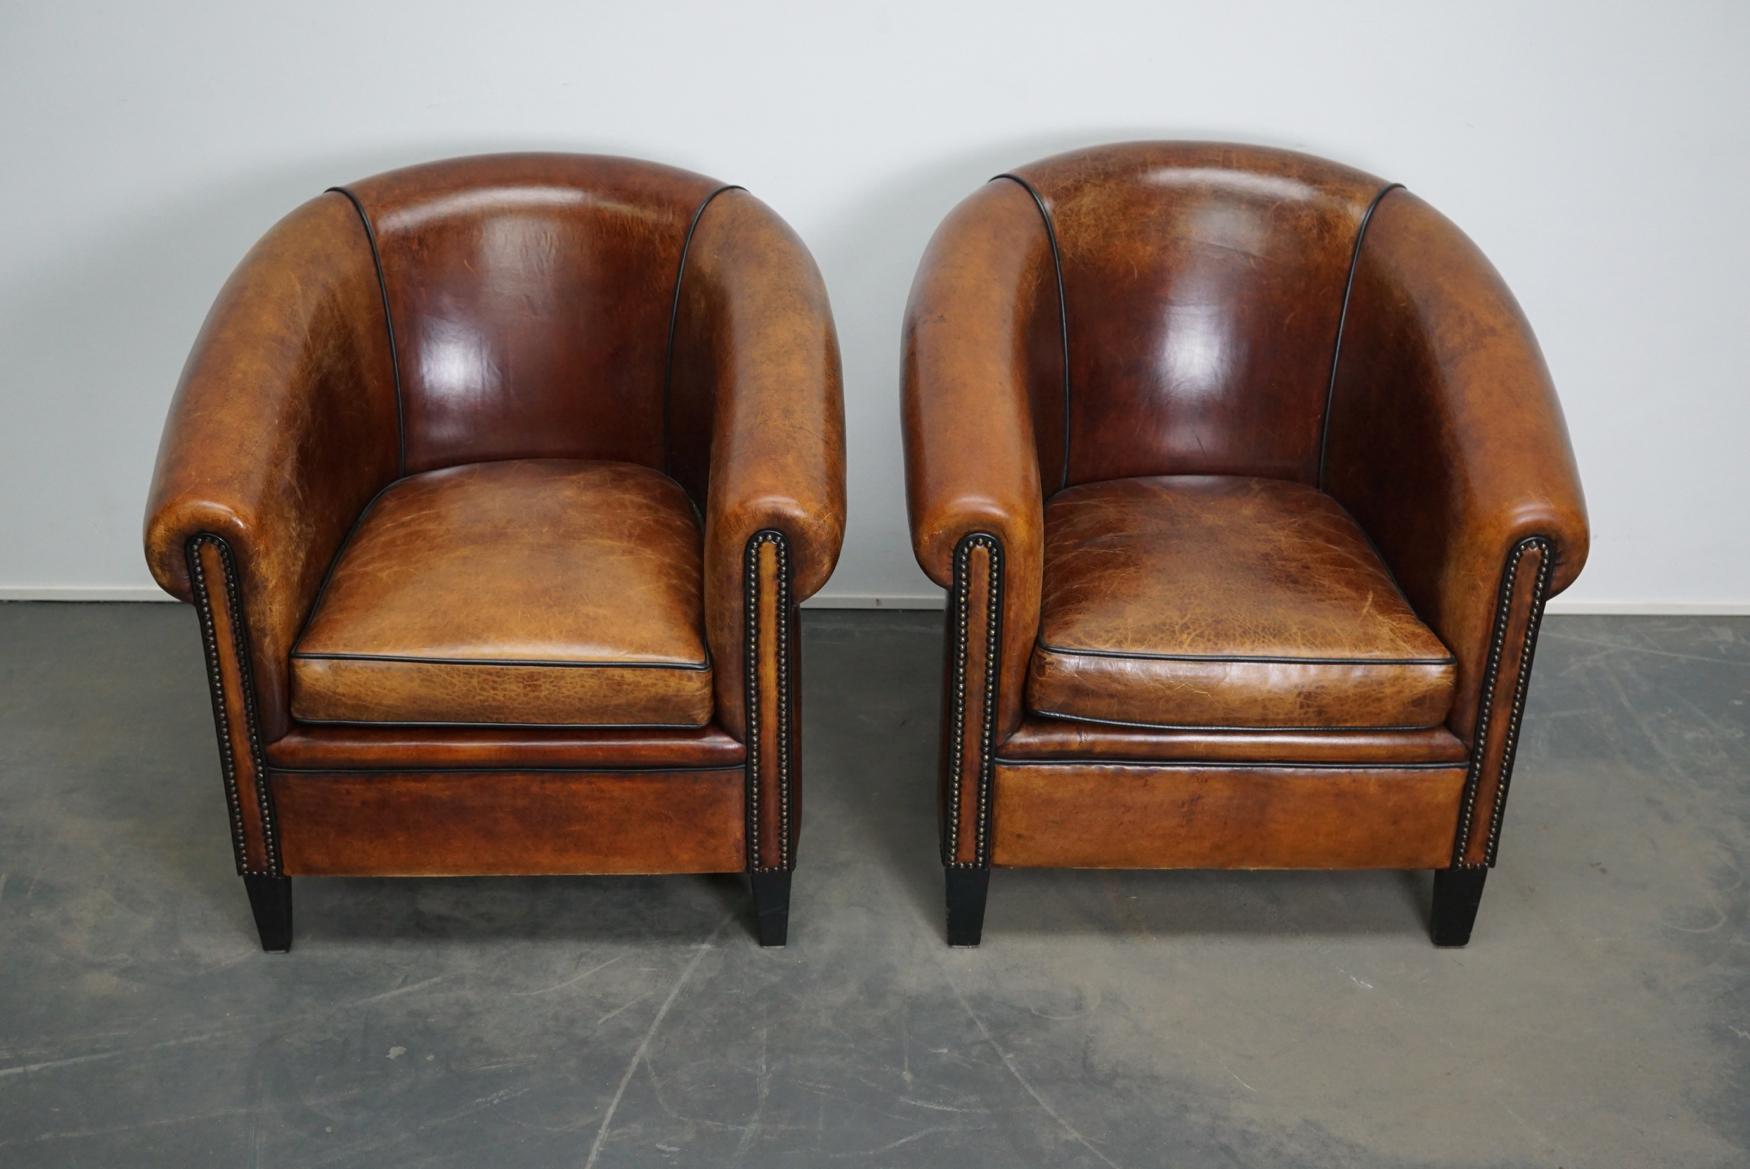 Late 20th Century Vintage Dutch Cognac Leather Club Chairs, Set of 2 with Hocker